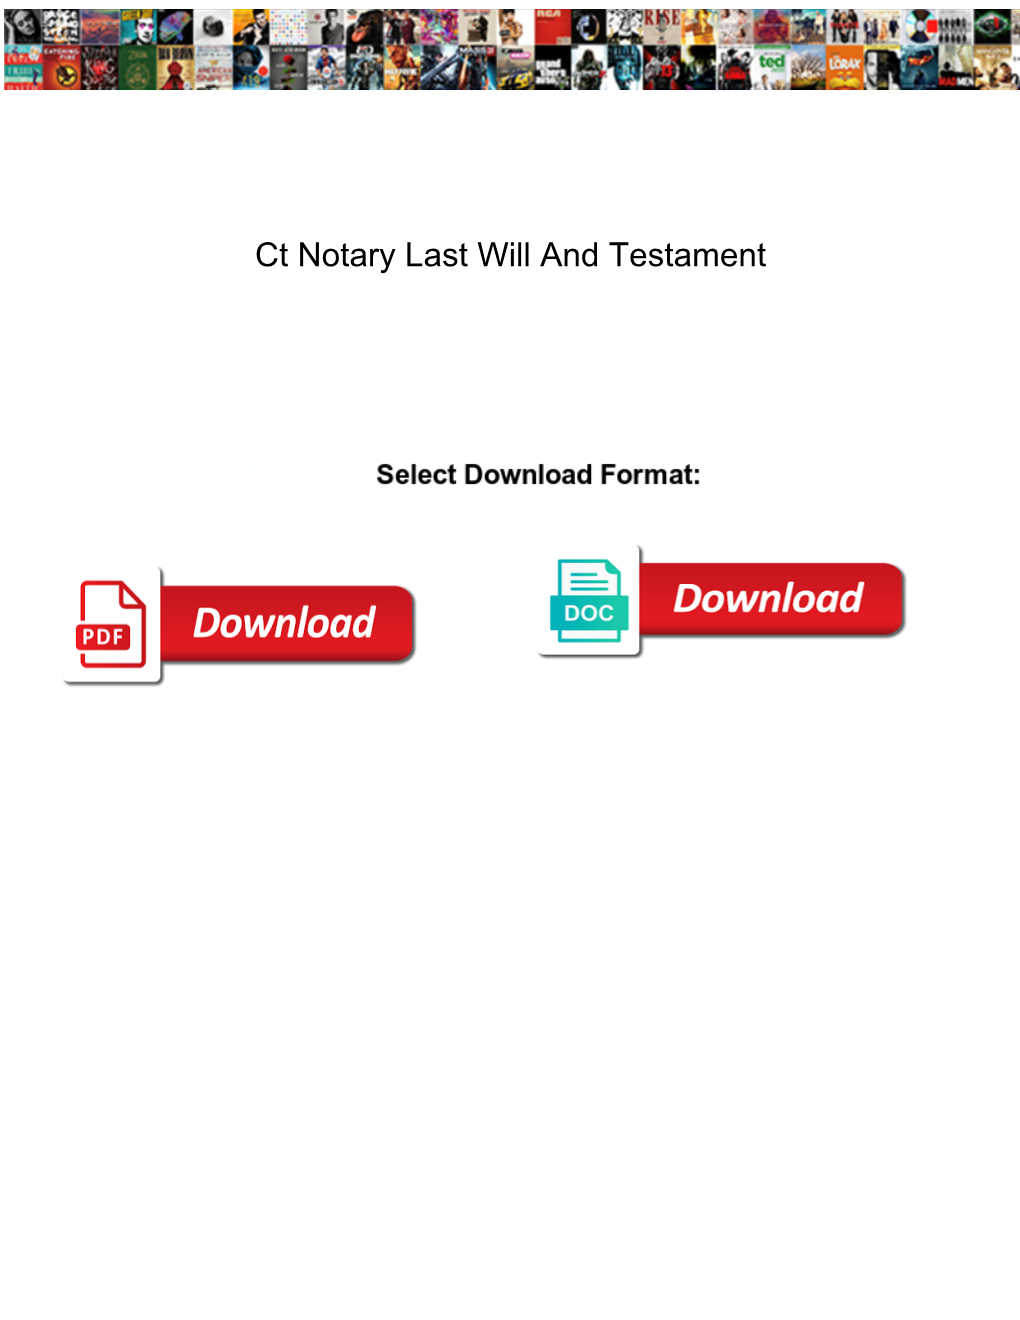 Ct Notary Last Will and Testament